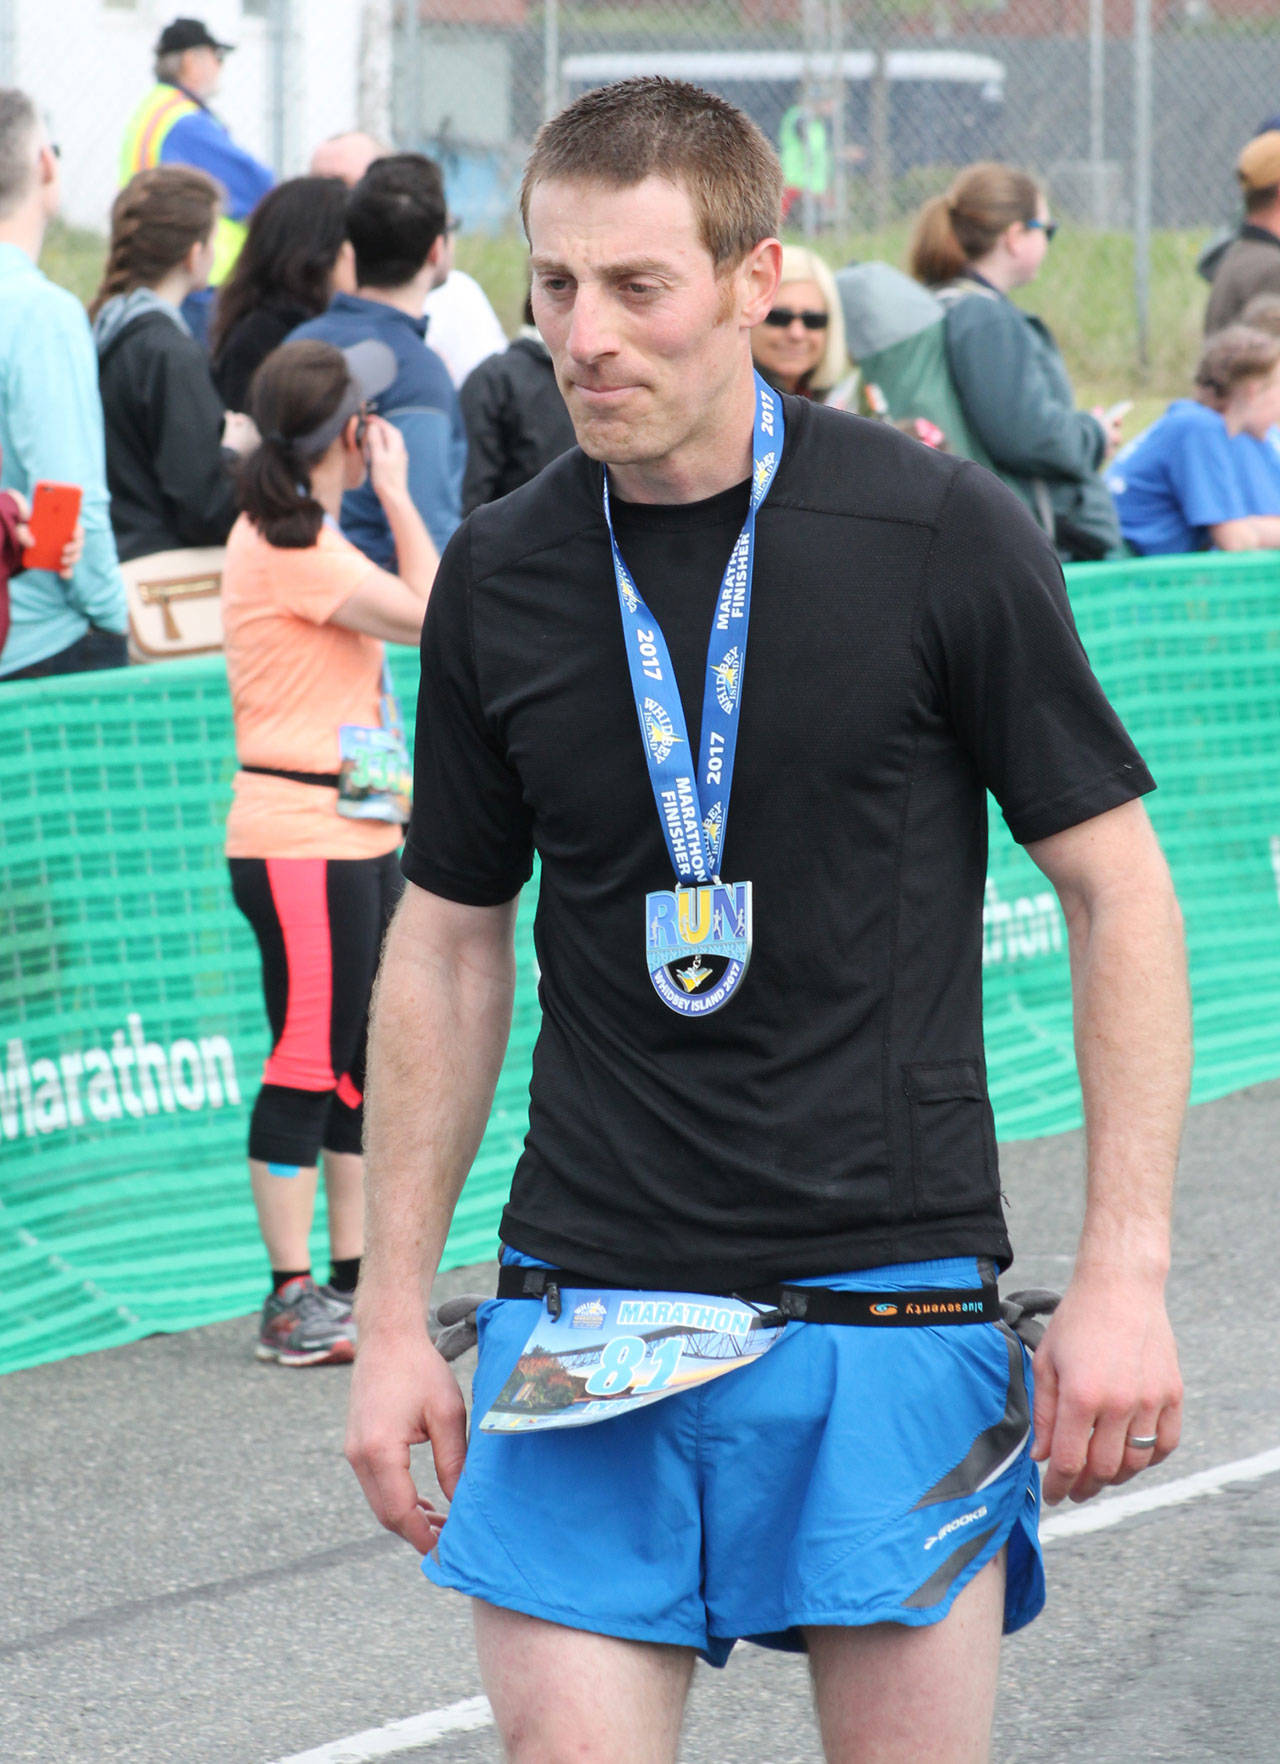 Ryan Hill finished first in the 2017 Whidbey Marathon. (Photo by Jim Waller/Whidbey News-Times)